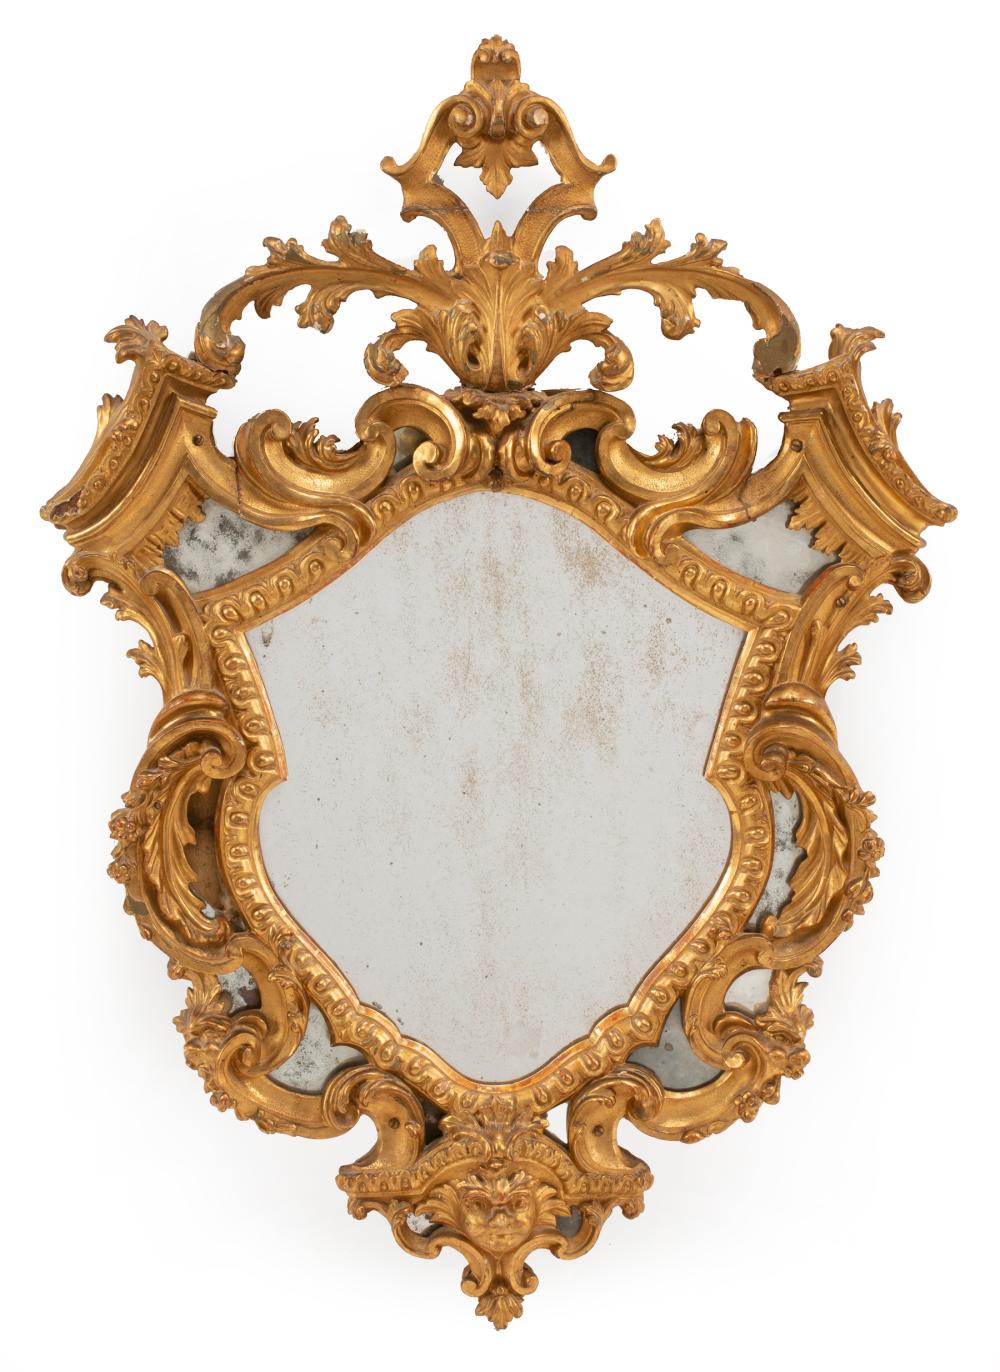 CHIPPENDALE-STYLE CARVED GILTWOOD